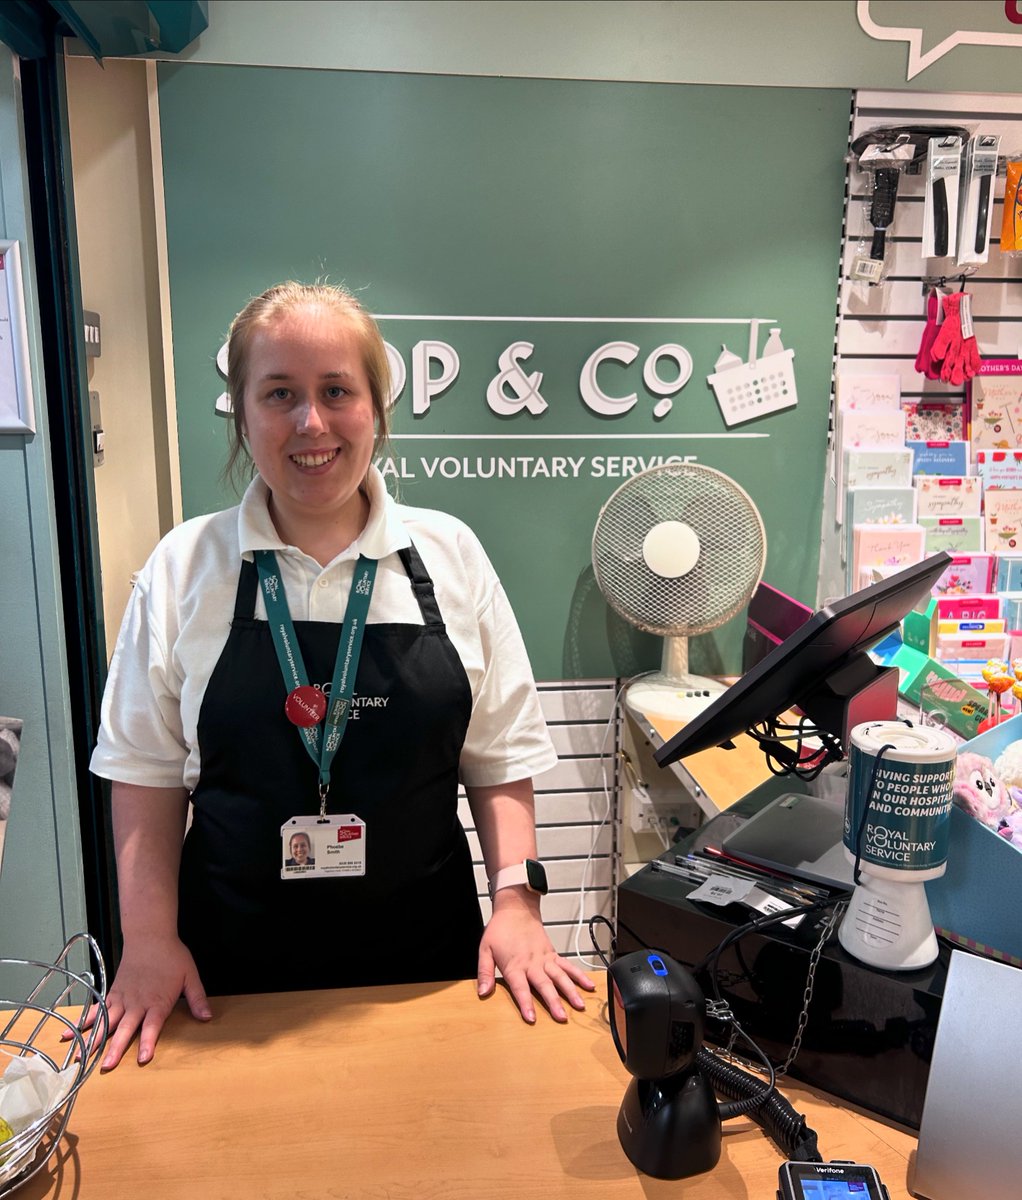 Another week done ✅ Phoebe has made excellent progress in her new rotation this week and is now serving customers on the till with little support. Well done Phoebe! ⭐️#supportedinternship